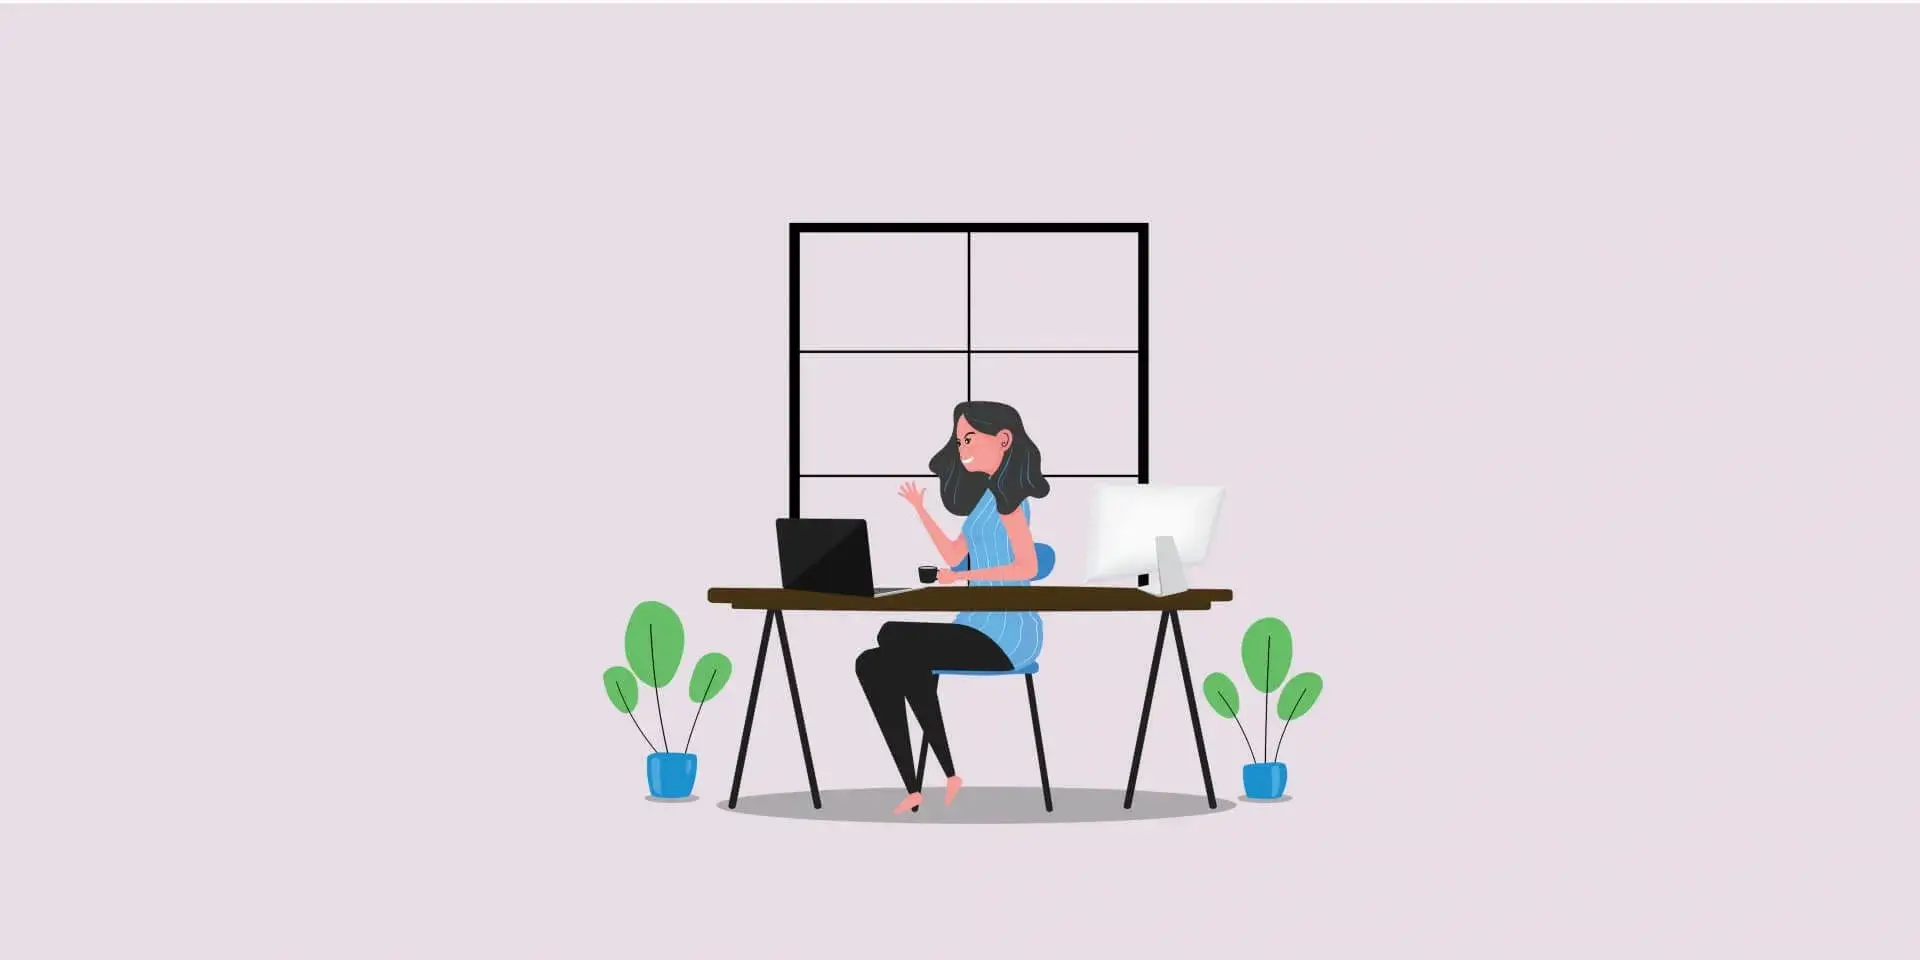 7 Best Job Sites To Find Remote Jobs Online In 2021 | Hire Remote  Developers | Build Teams in 24 Hours